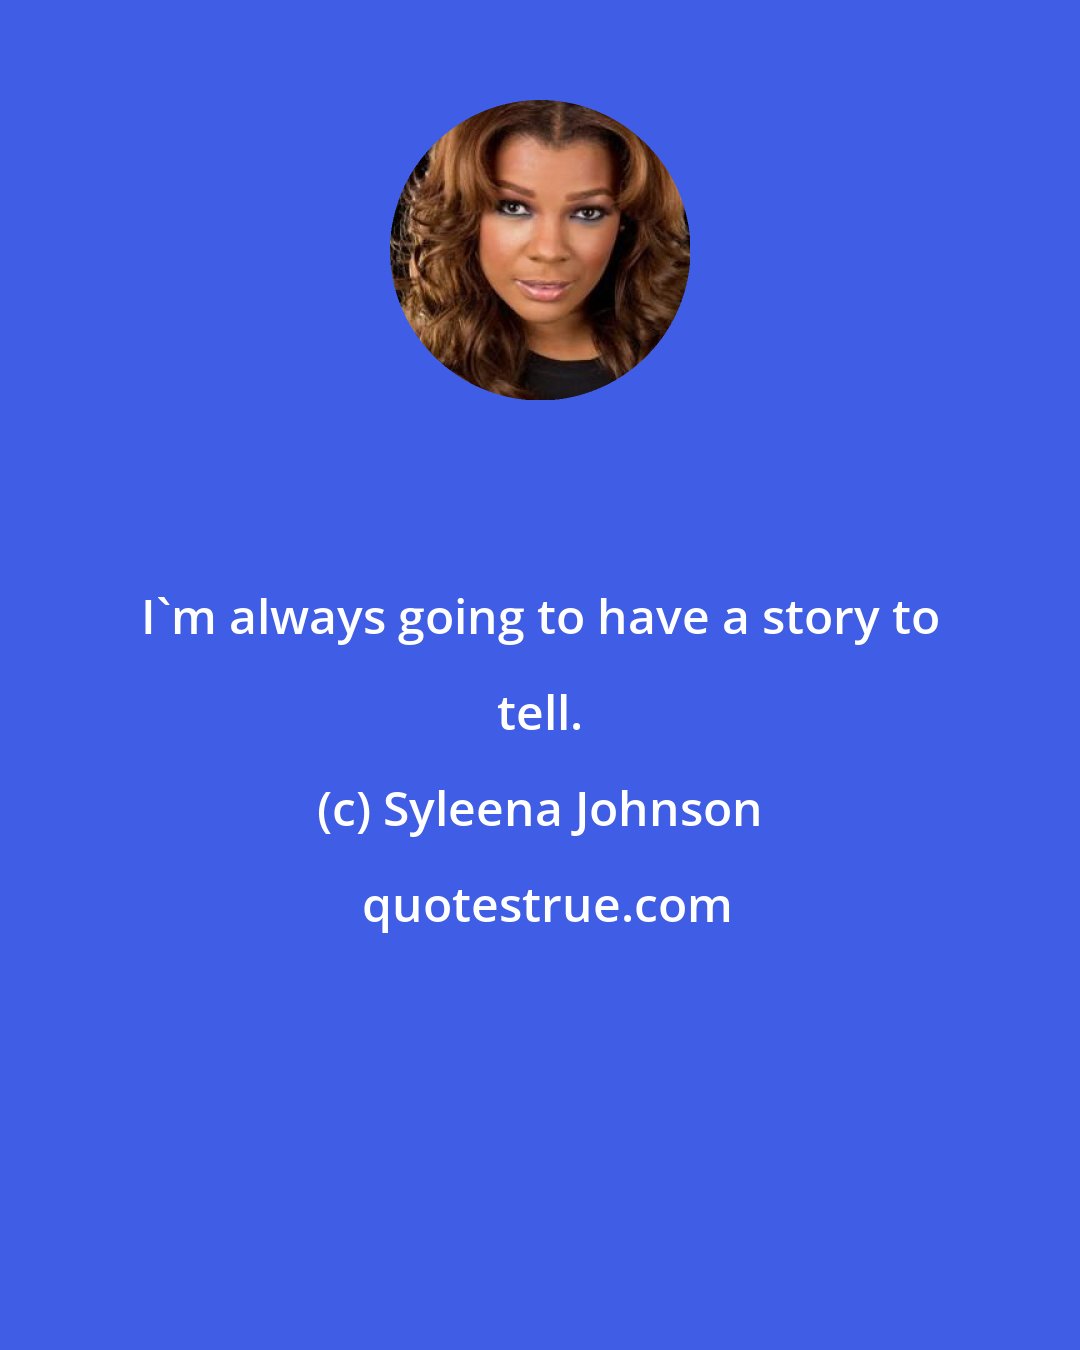 Syleena Johnson: I'm always going to have a story to tell.